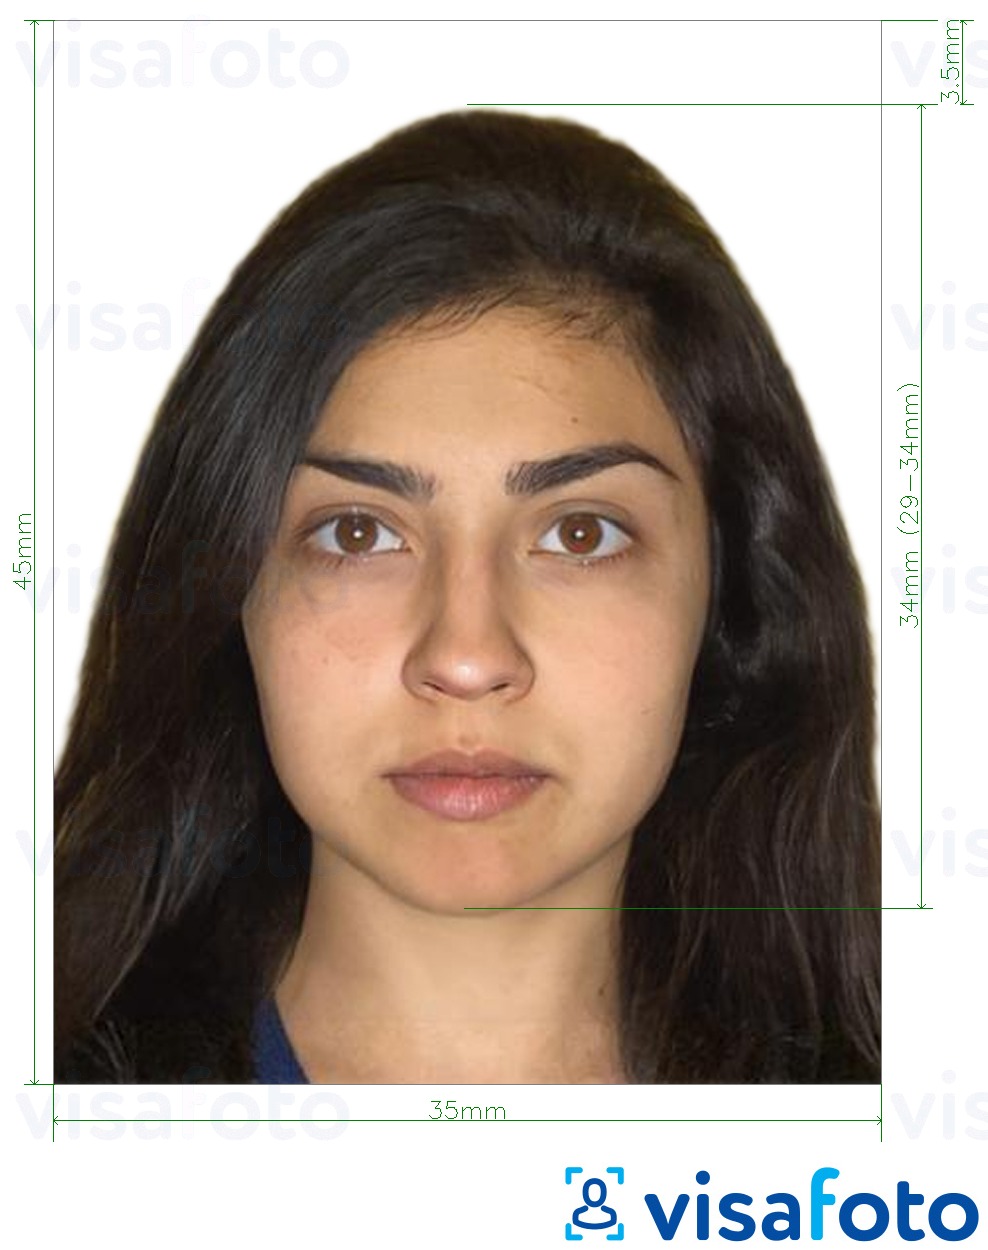 Example of photo for Pakistan National ID card (NADRA, NICOP) 35x45 mm with exact size specification